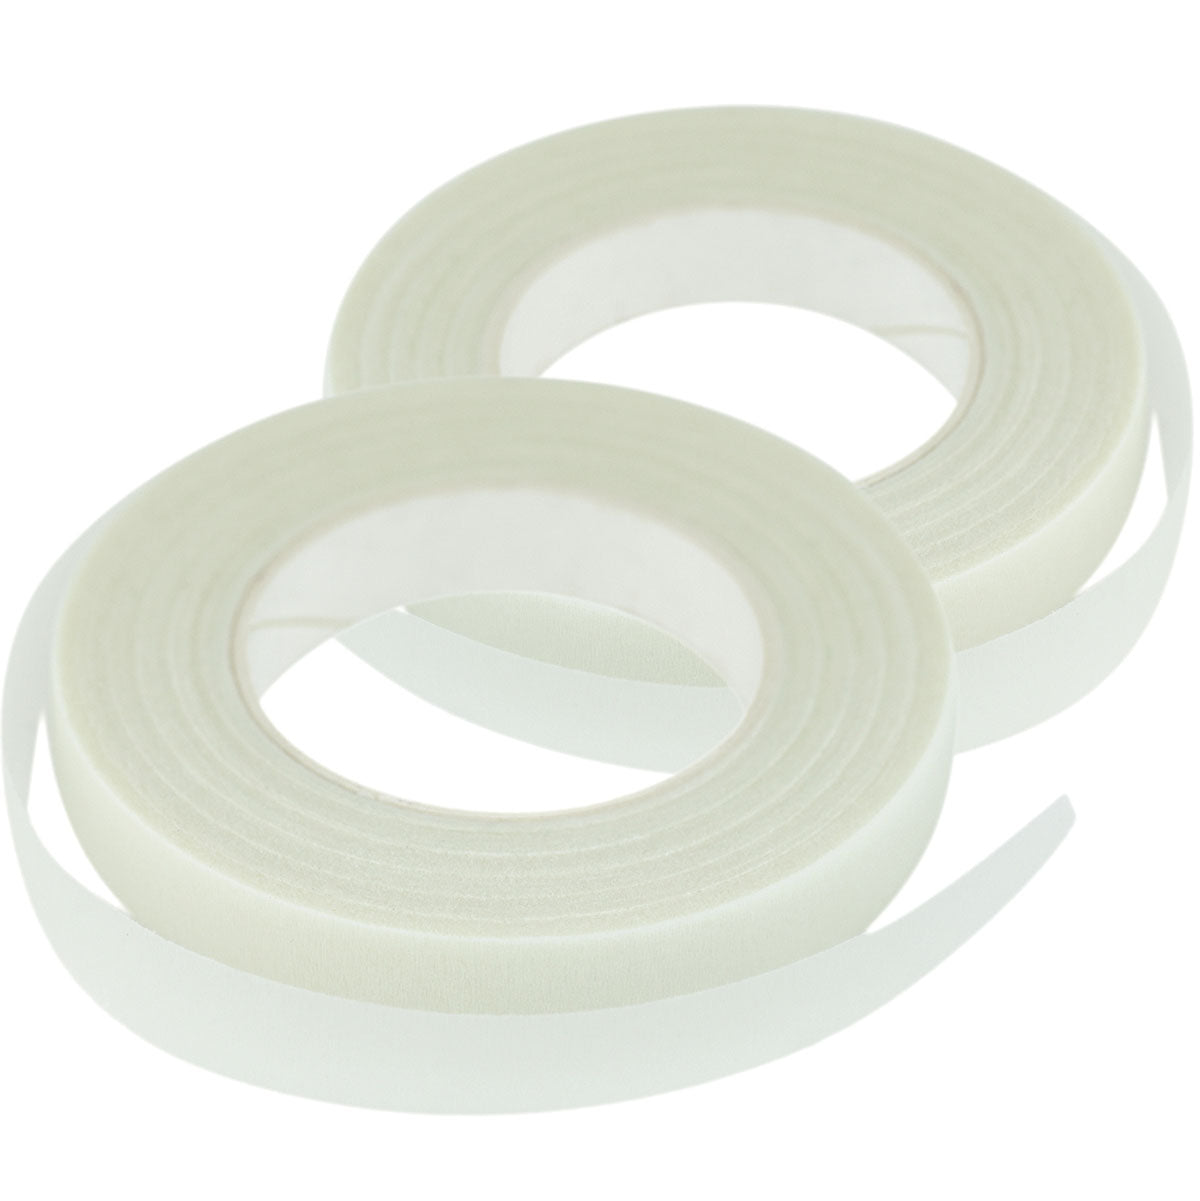 White Floral Tapes (60 Yards) Binds Flower Stems Together for Bouquets Corsages Boutonnieres 2-Pack